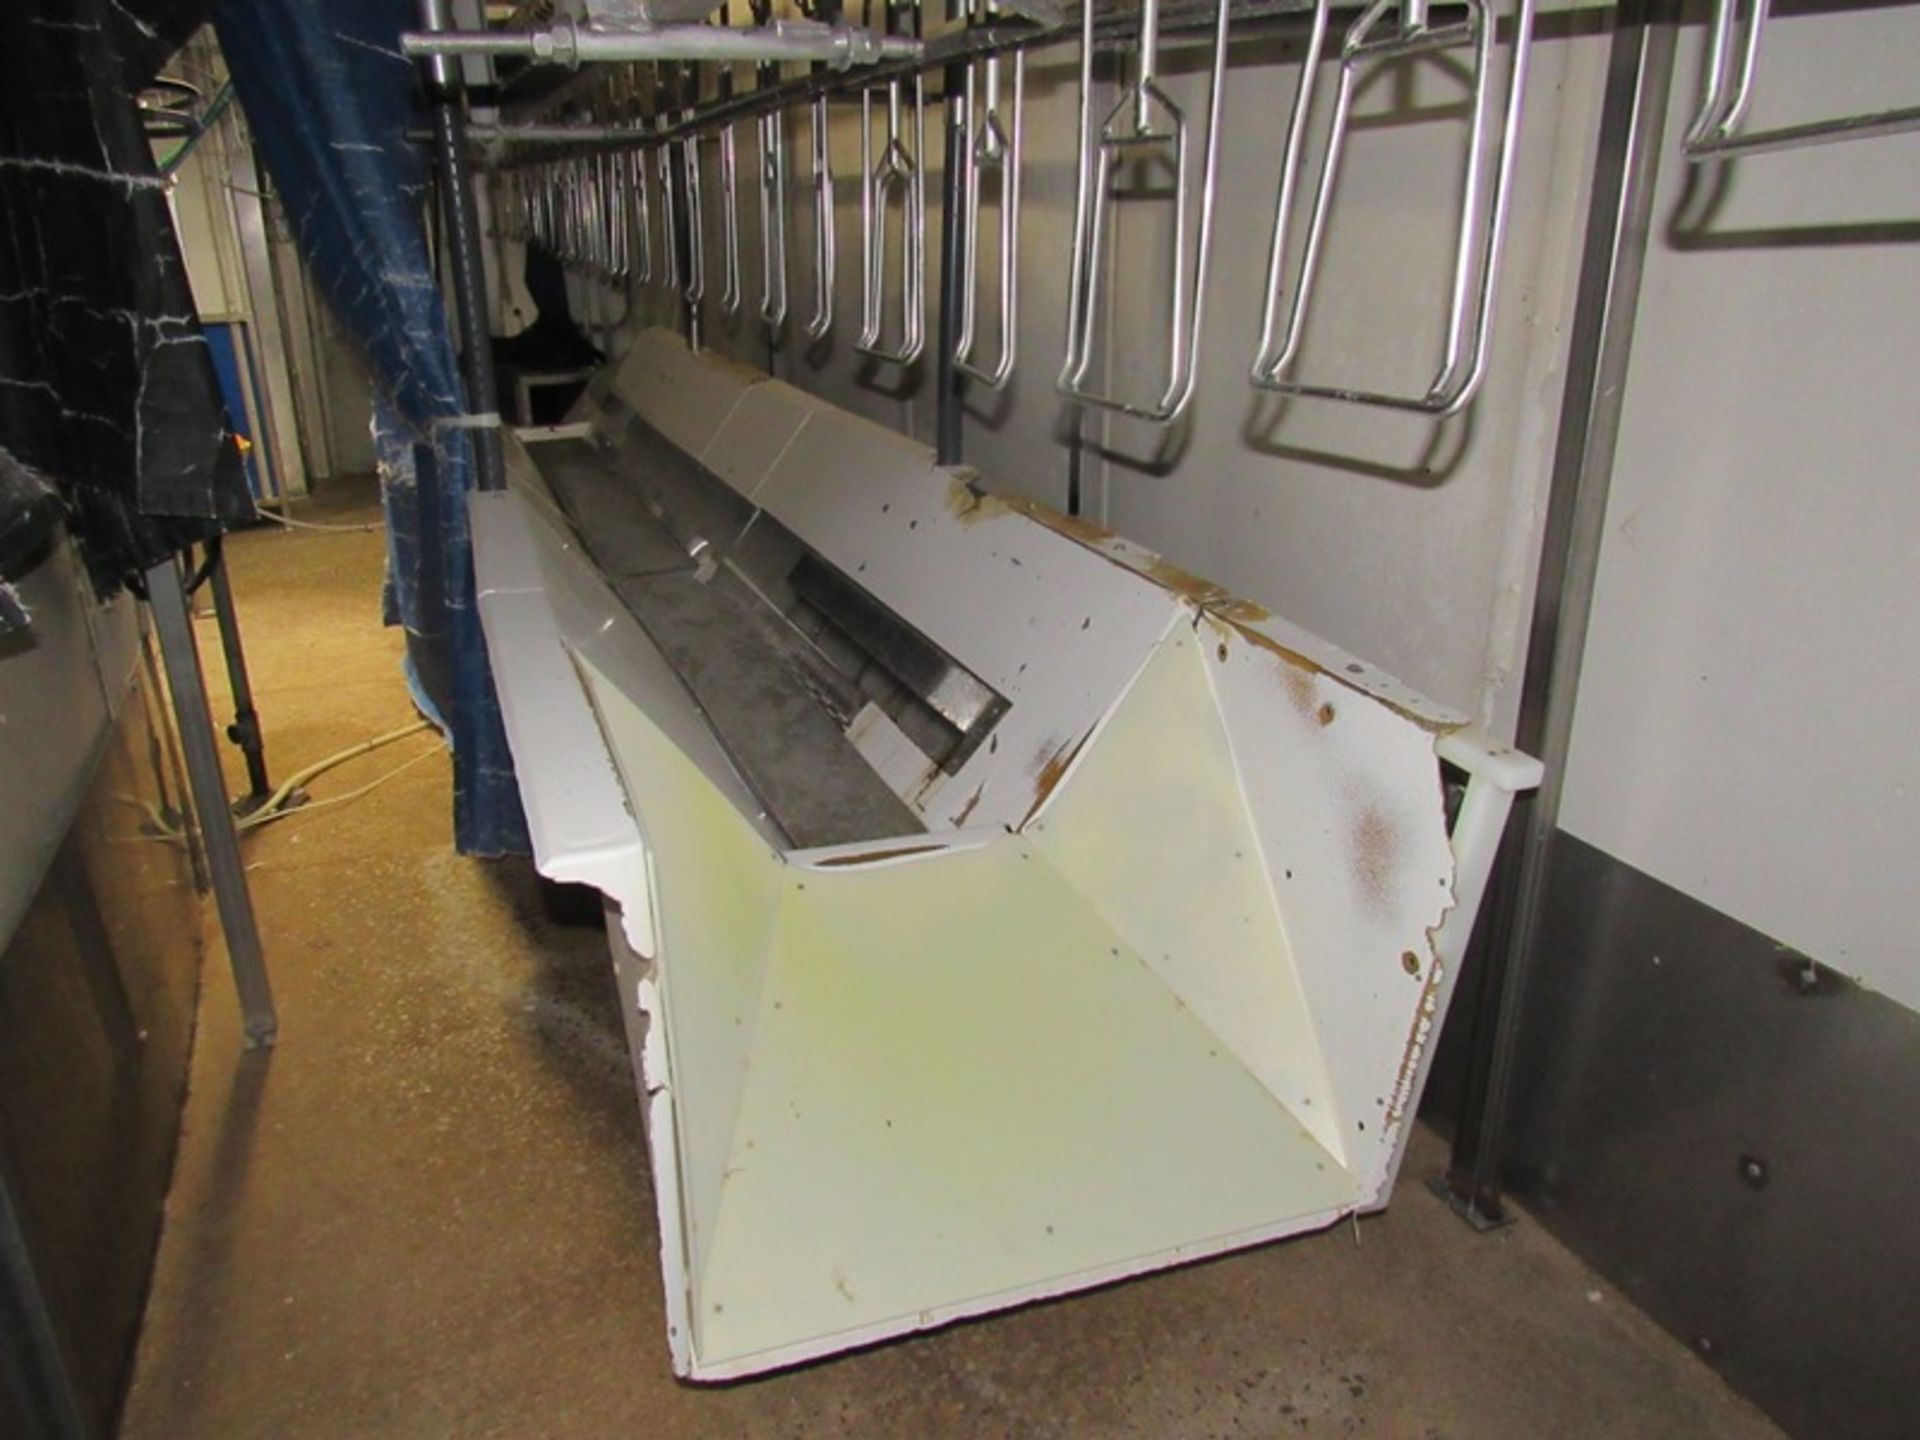 Lot Rail, Hangers and Chain approx. 800 stainless steel turkey Hangers on approx. | Rig Fee: $5200 - Image 14 of 15